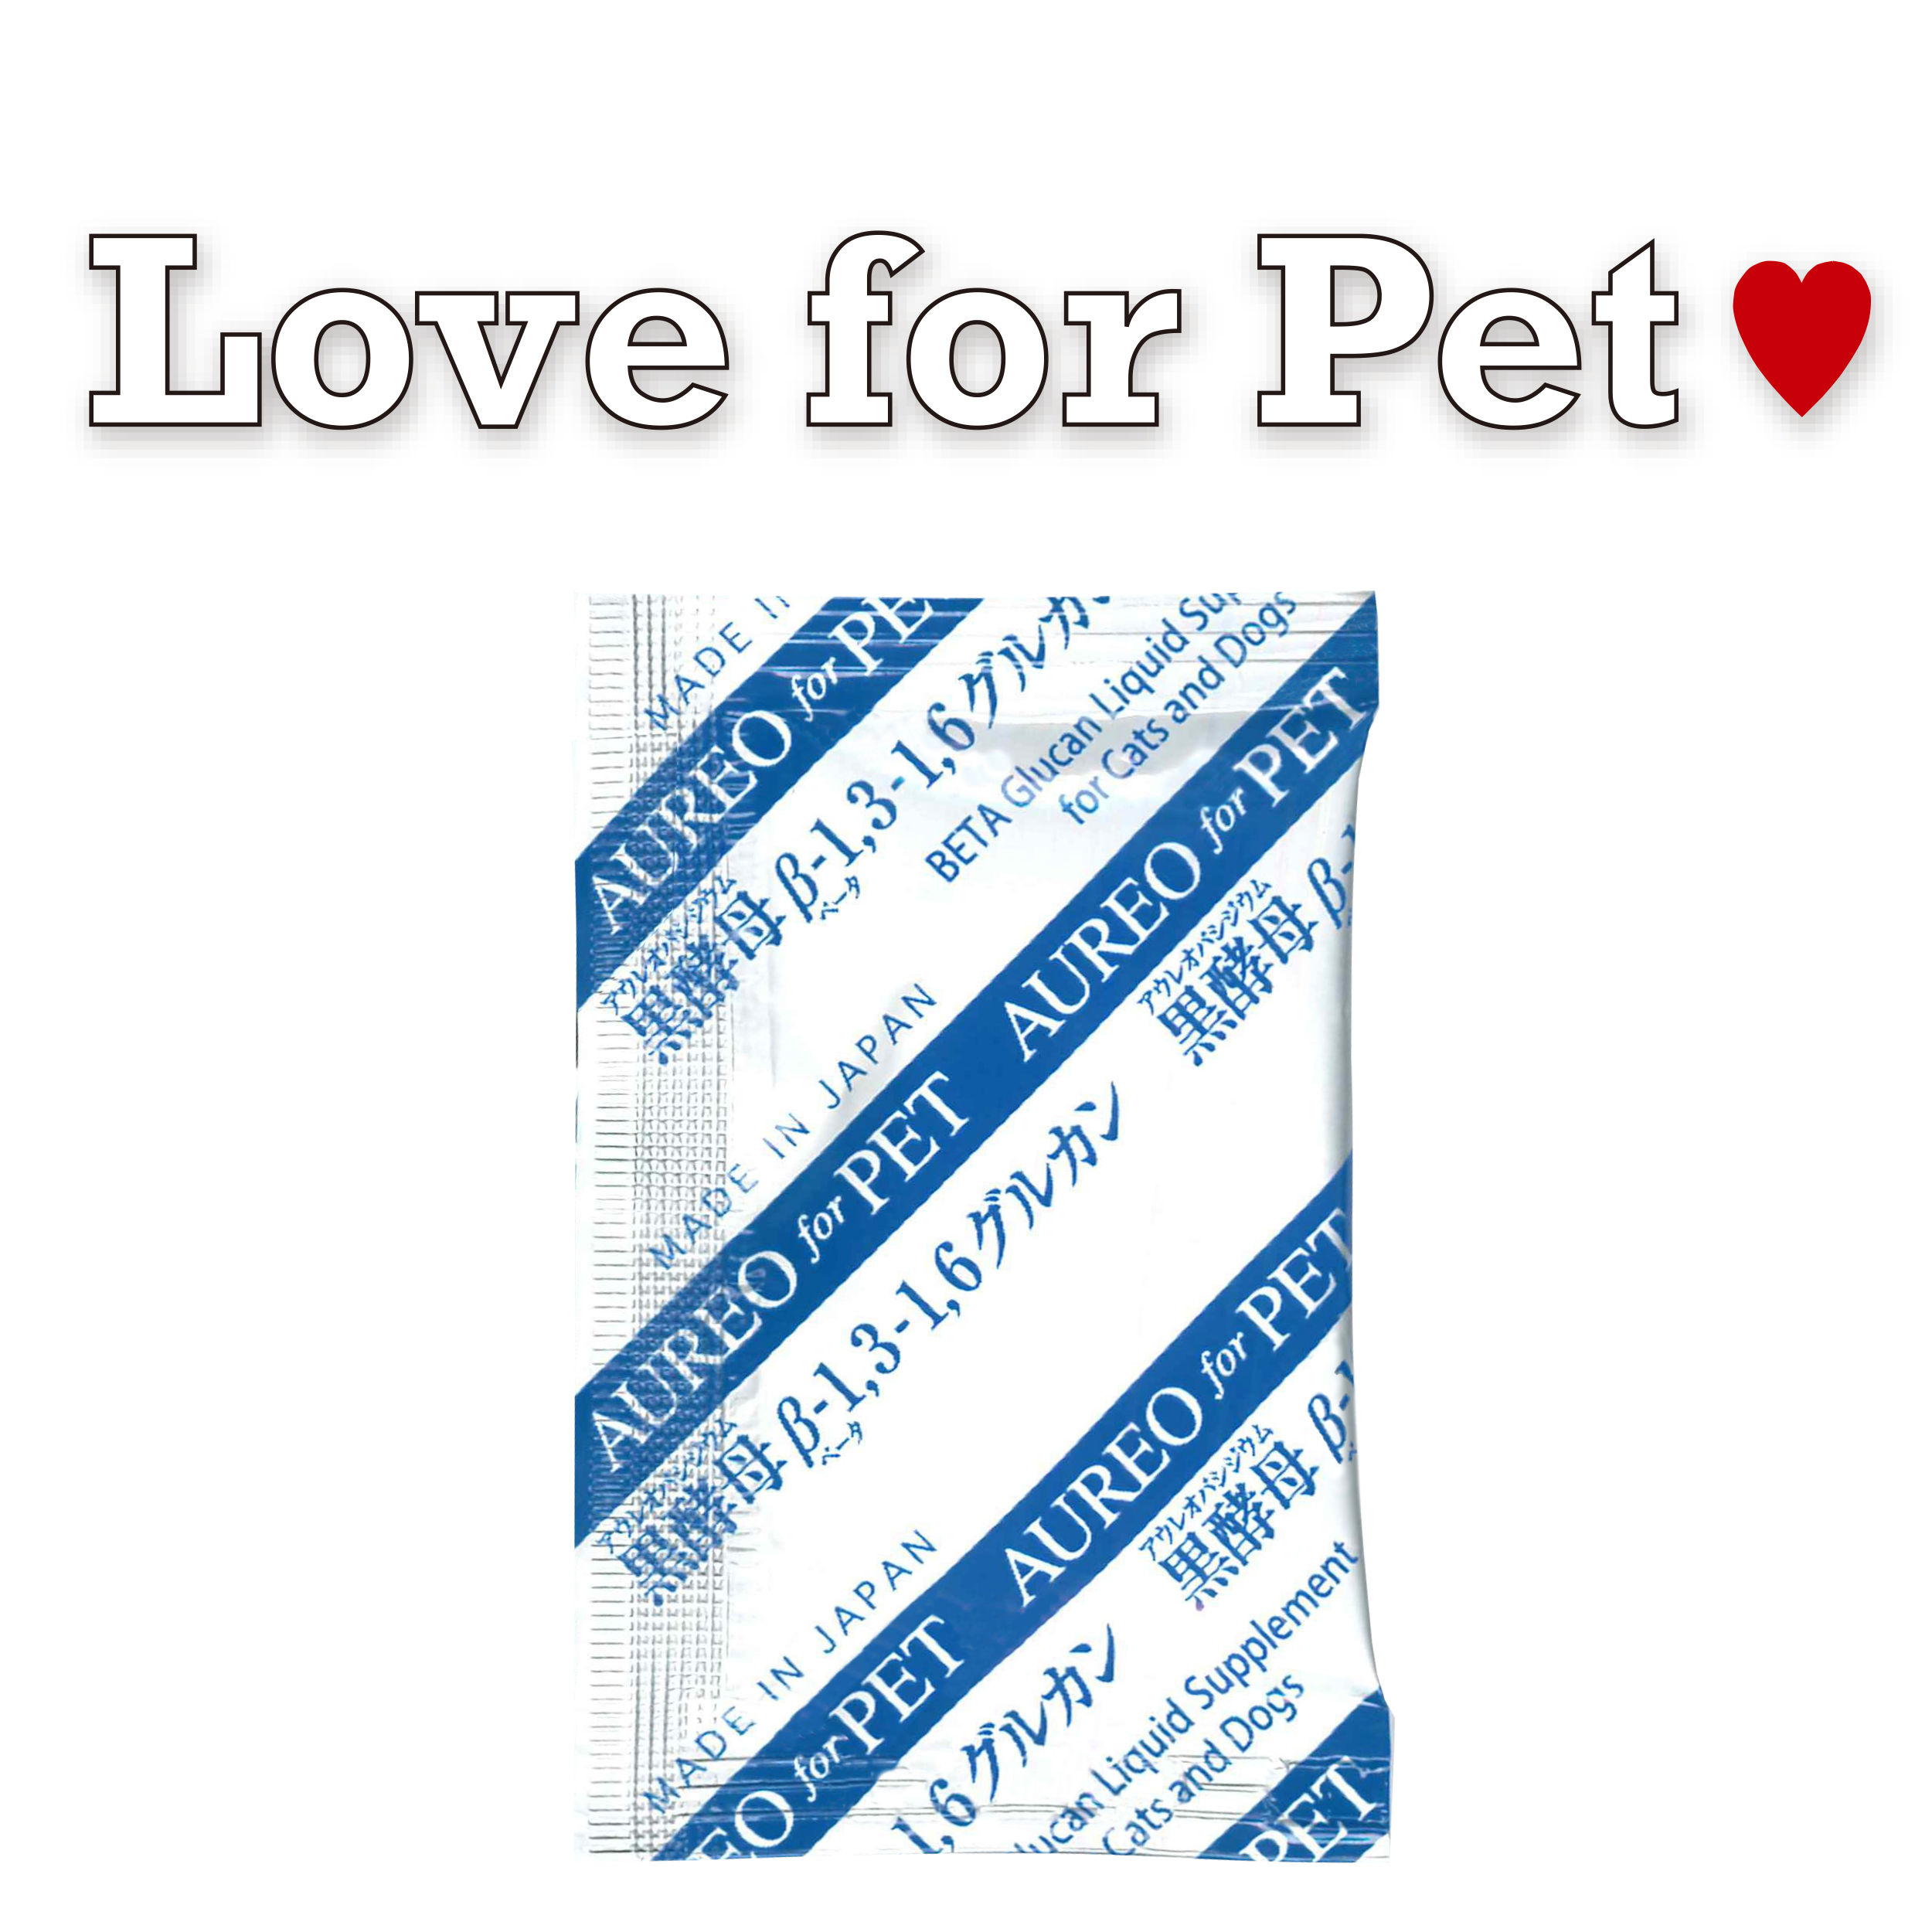 Love for Pet